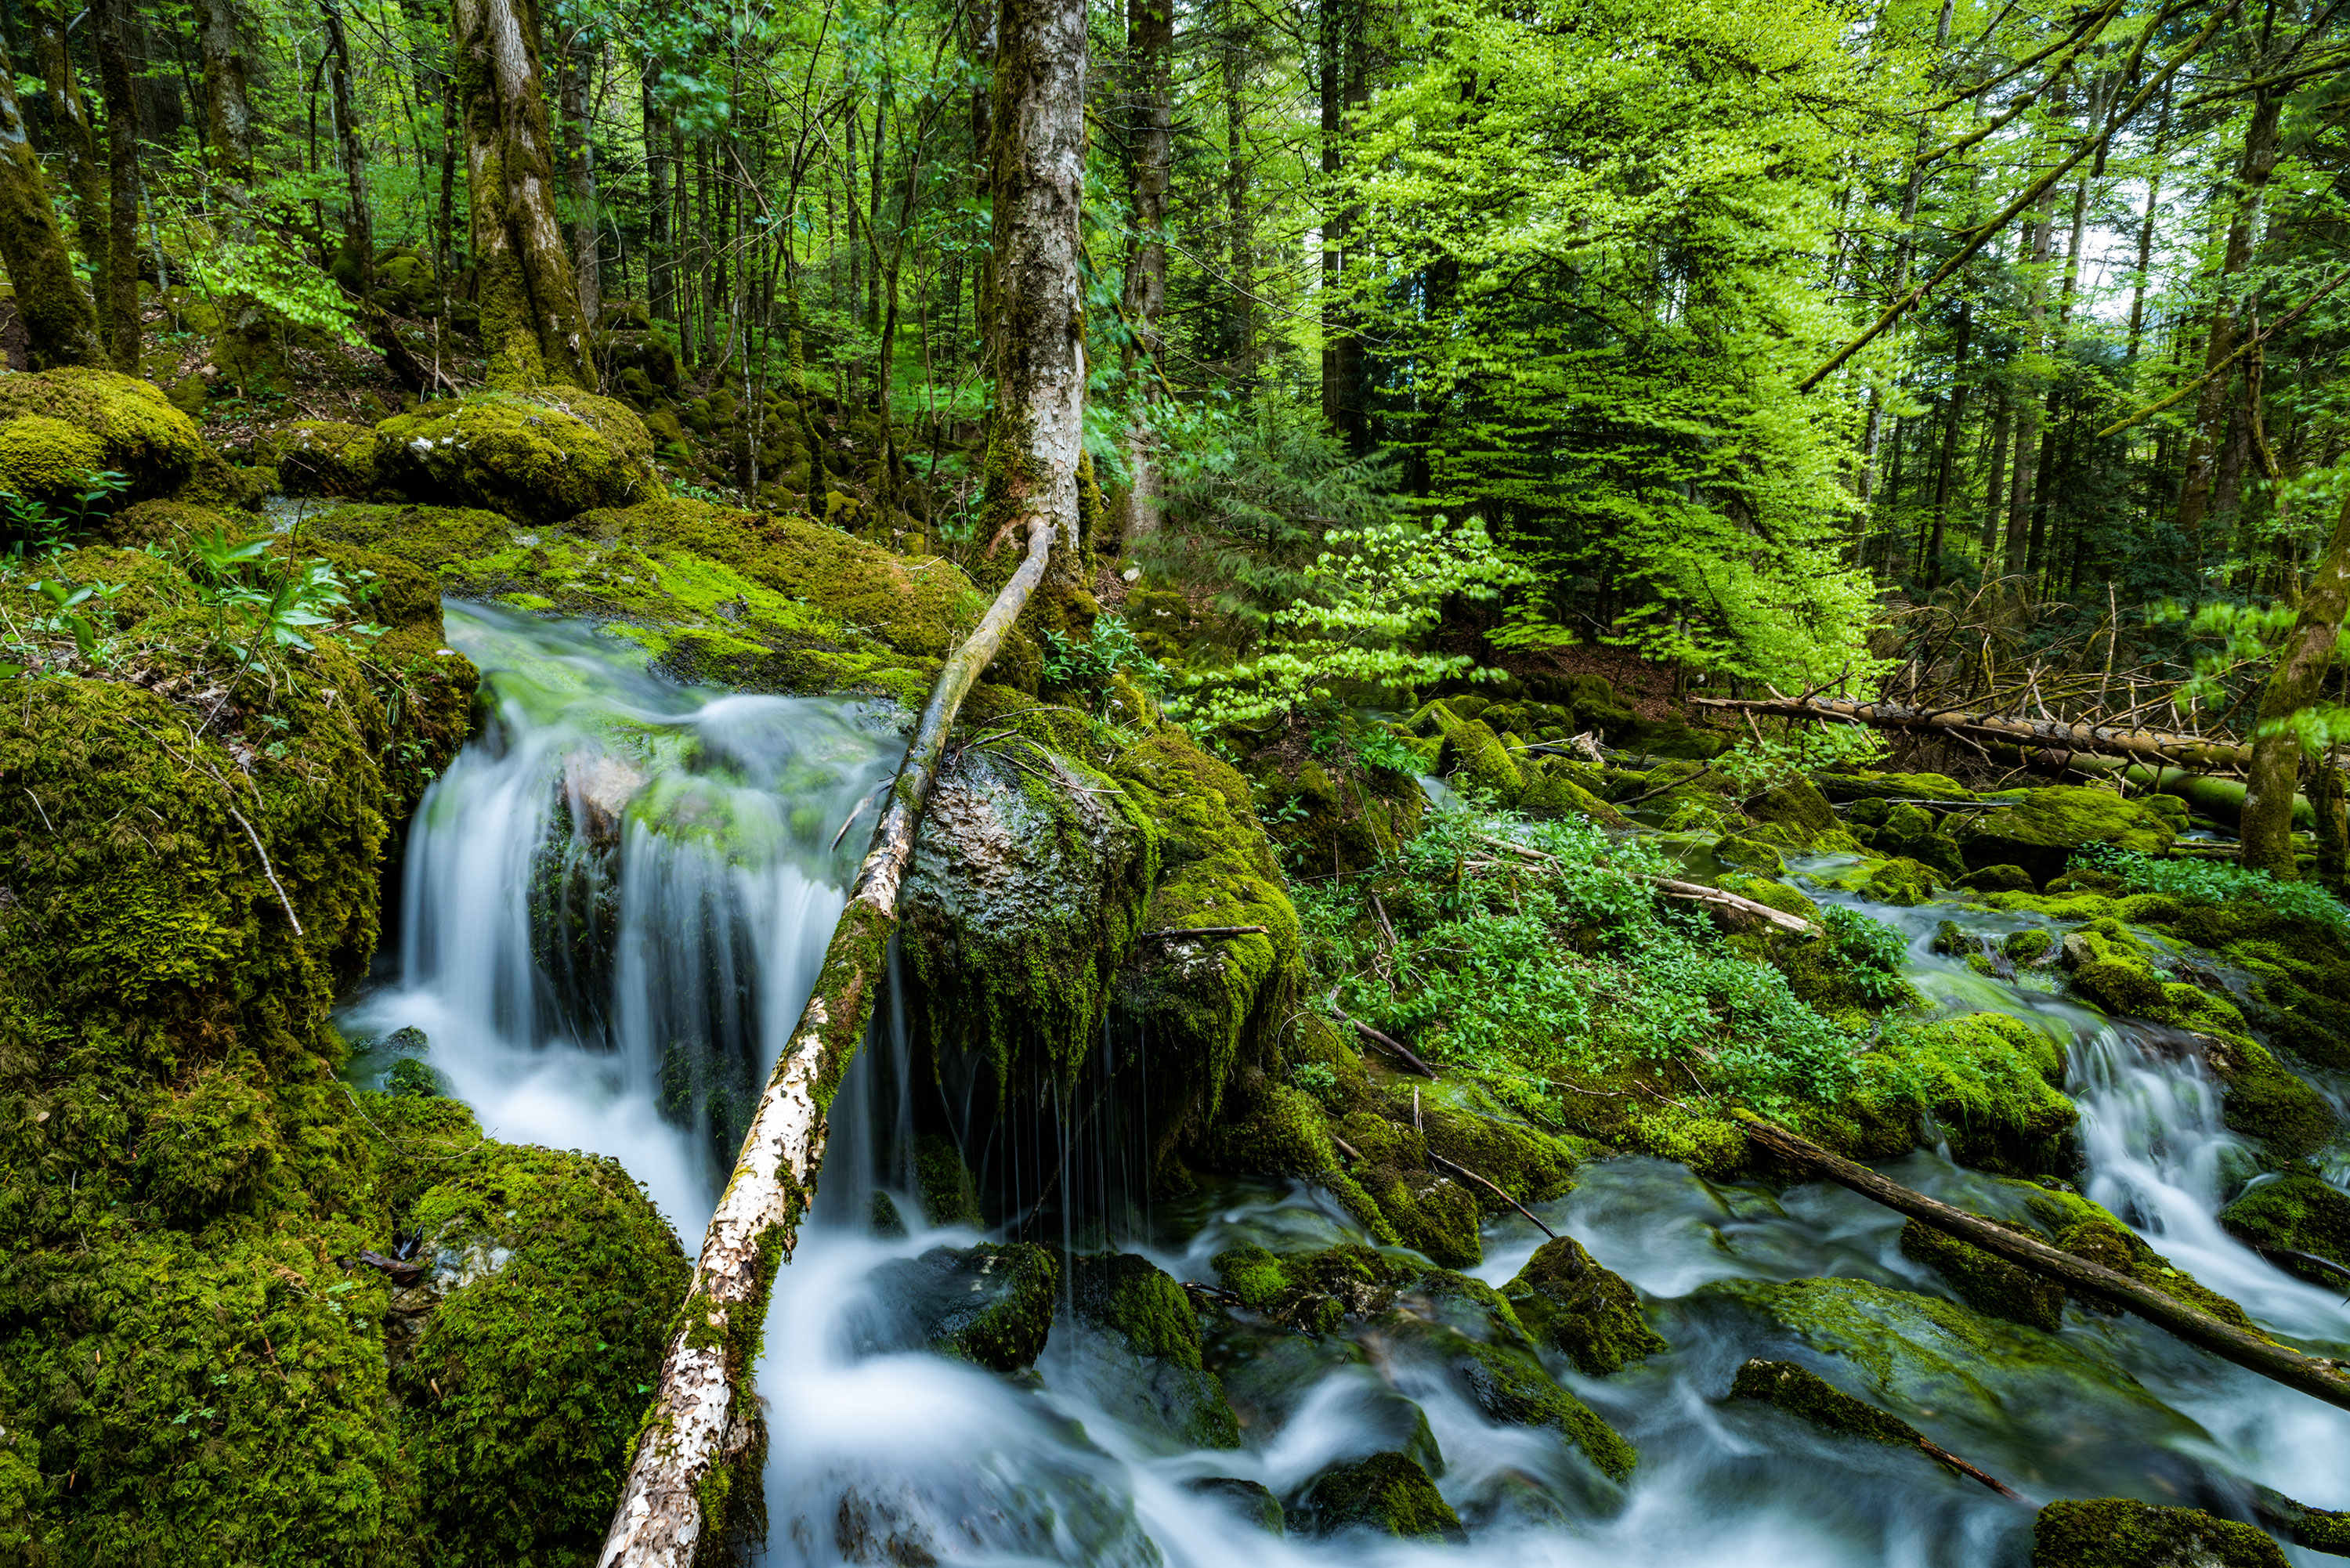 Forest and river landscape photography, in Switzerland. Image by Jennifer Esseiva.